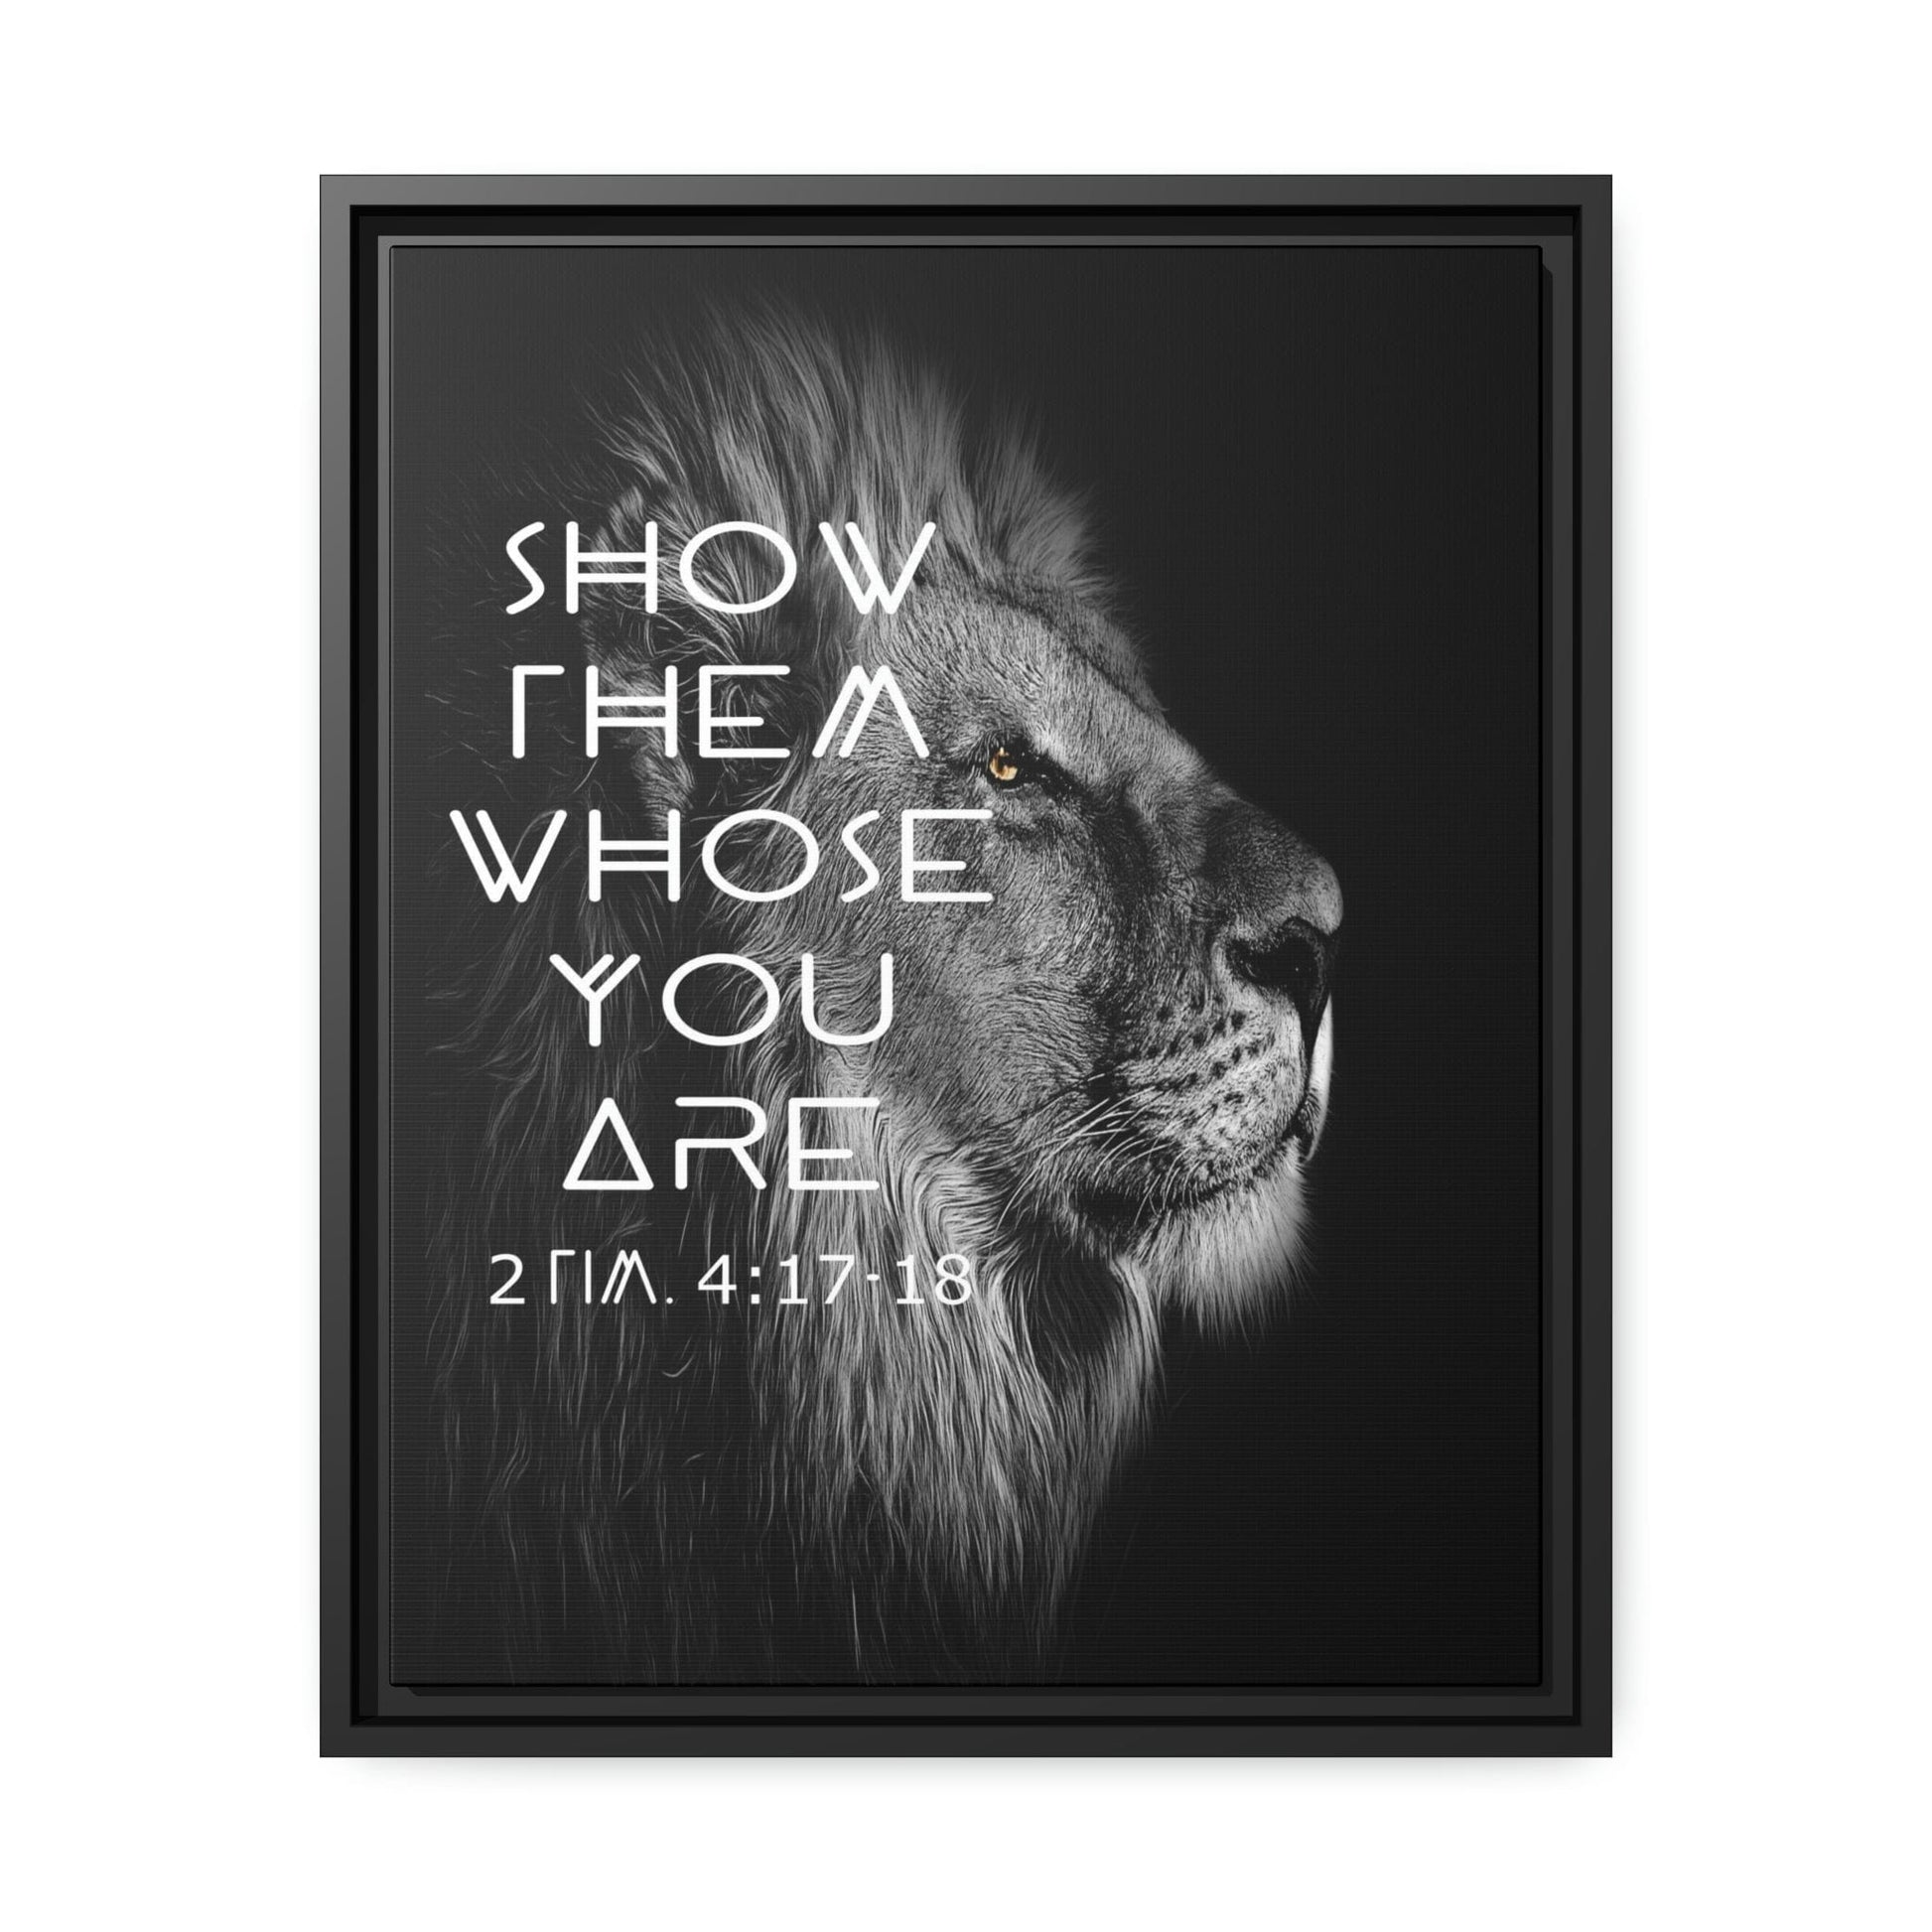 Printify Canvas 16″ x 20″ (Vertical) / Black / 1.25" Show Them Whose You Are - 2 Tim 4:17-18 Christian Canvas Wall Art